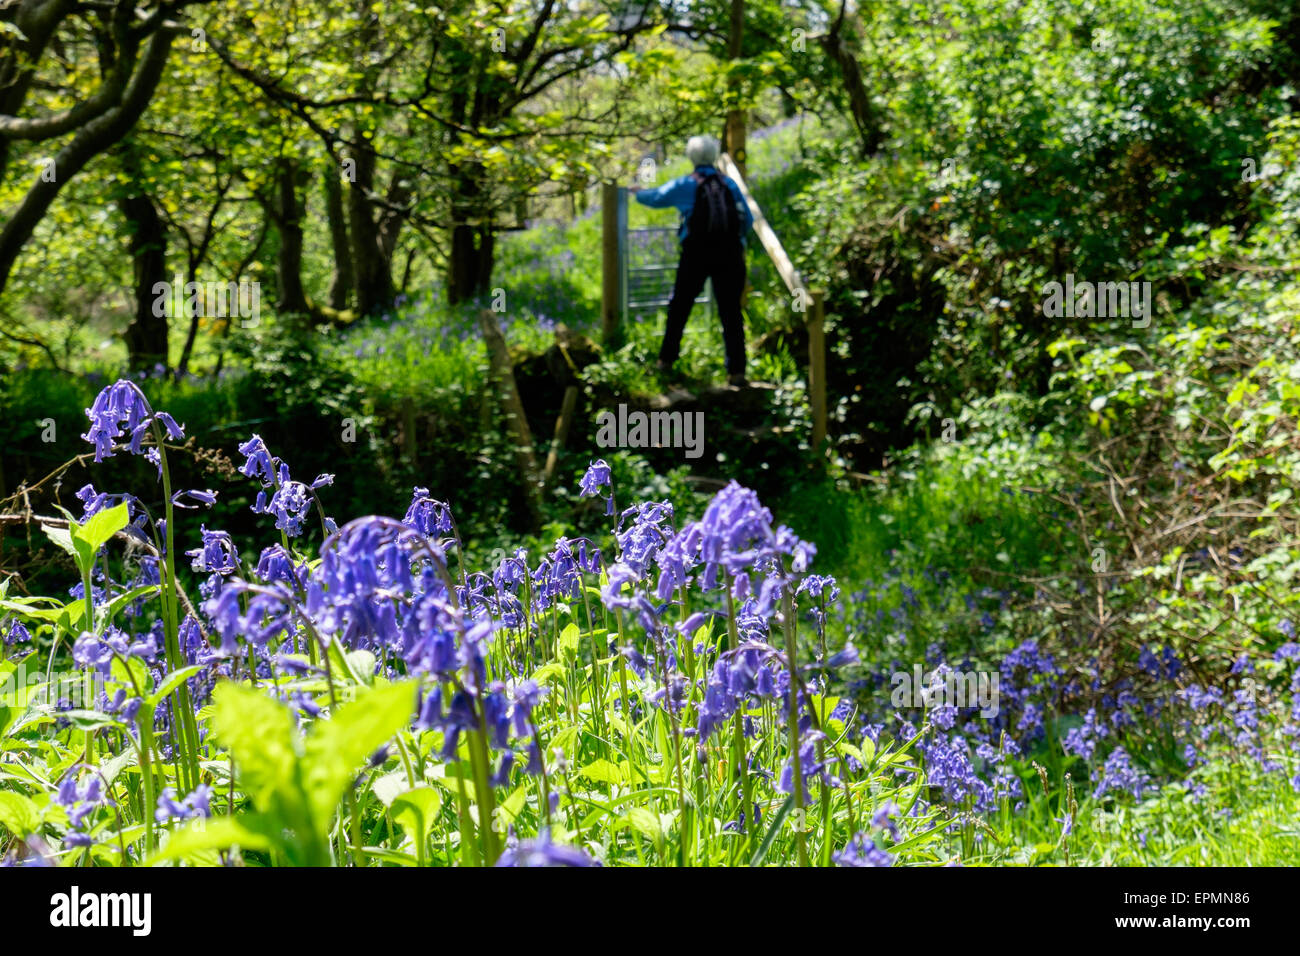 Country footpath through Bluebells with person walking to a gate in rural Bluebell woodland in spring. Rhydwyn Isle of Anglesey North Wales UK Britain Stock Photo